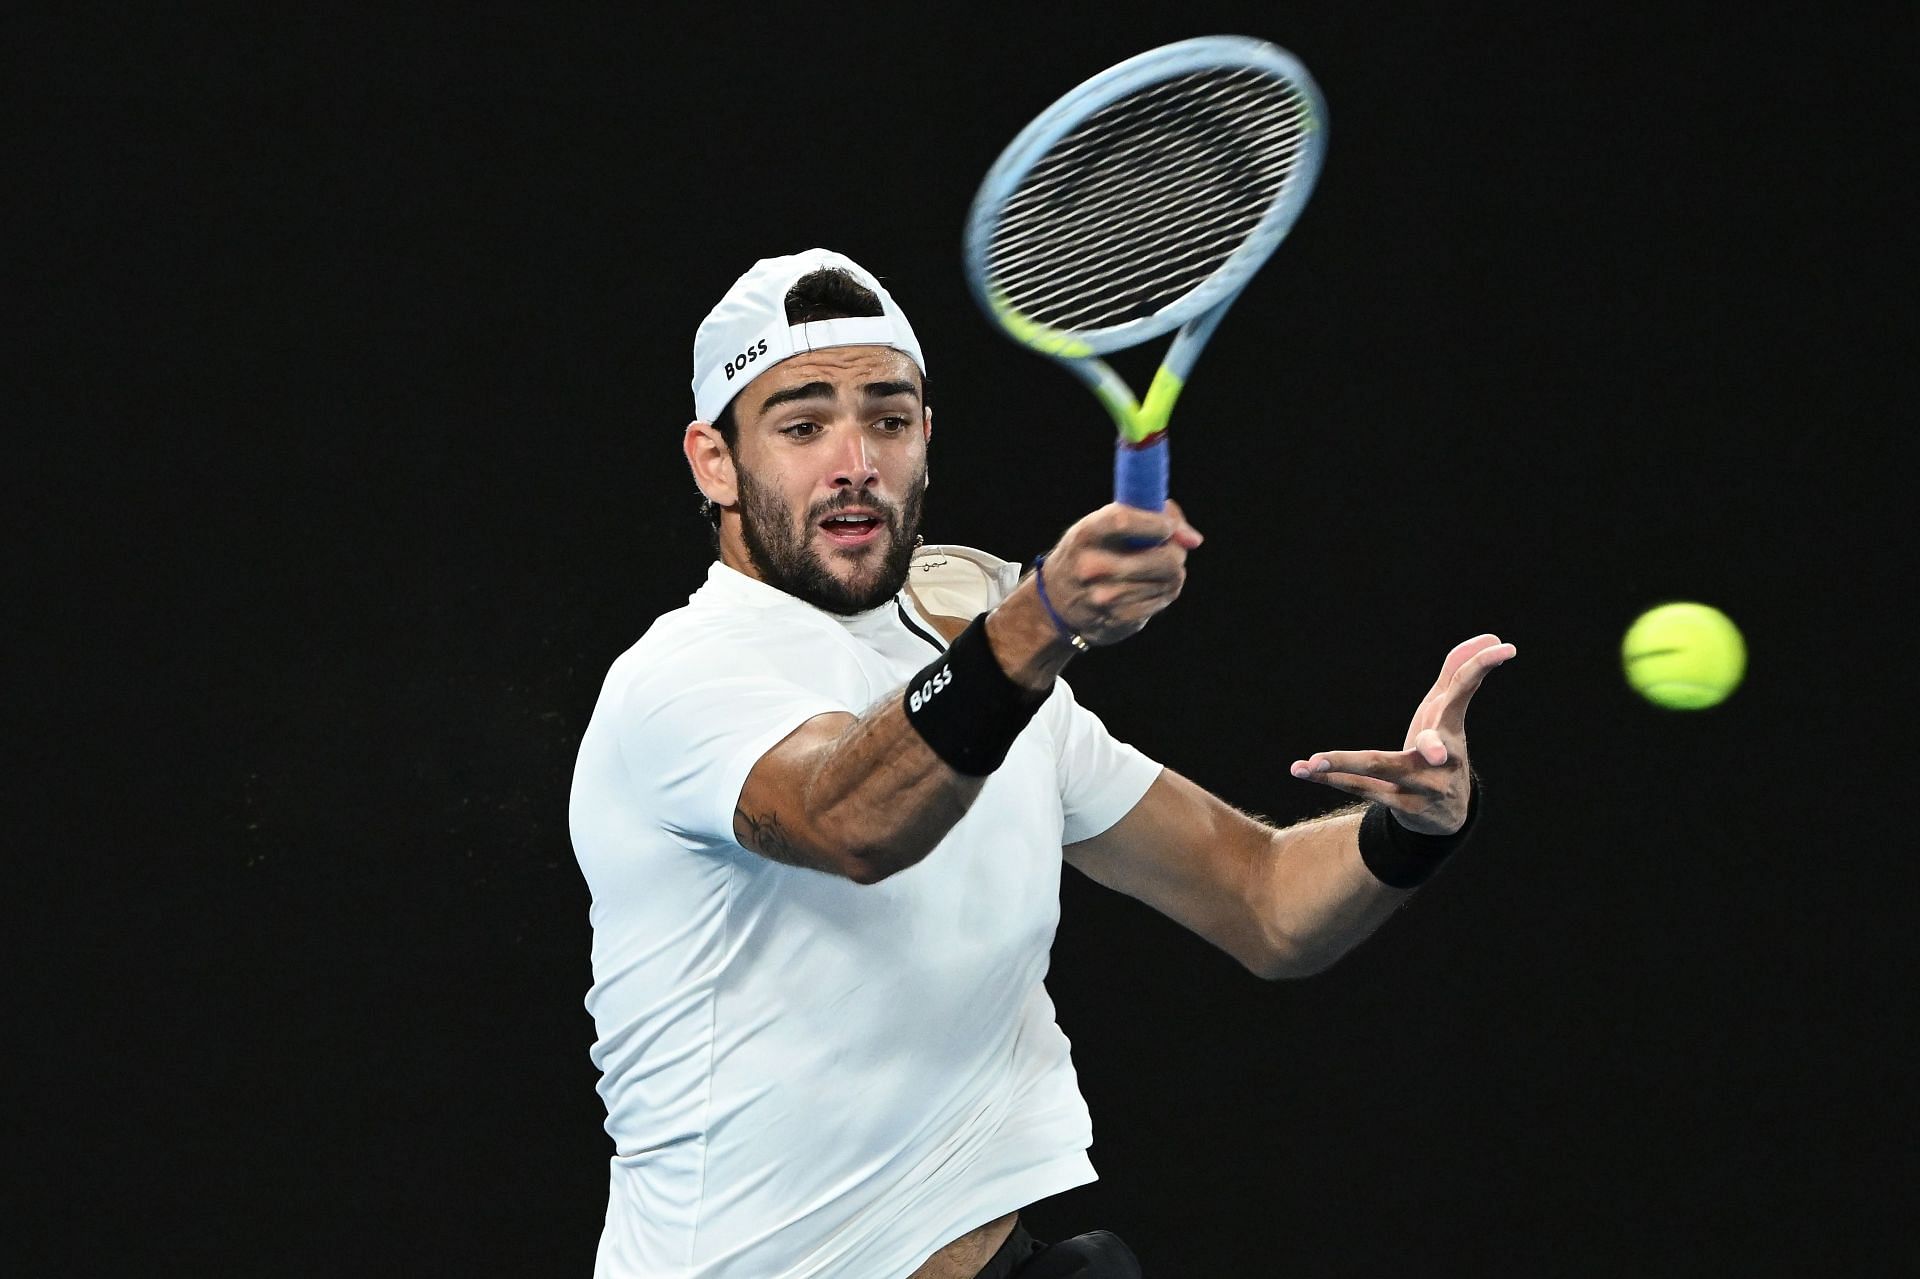 Matteo Berrettini is the top seed at this tournament.